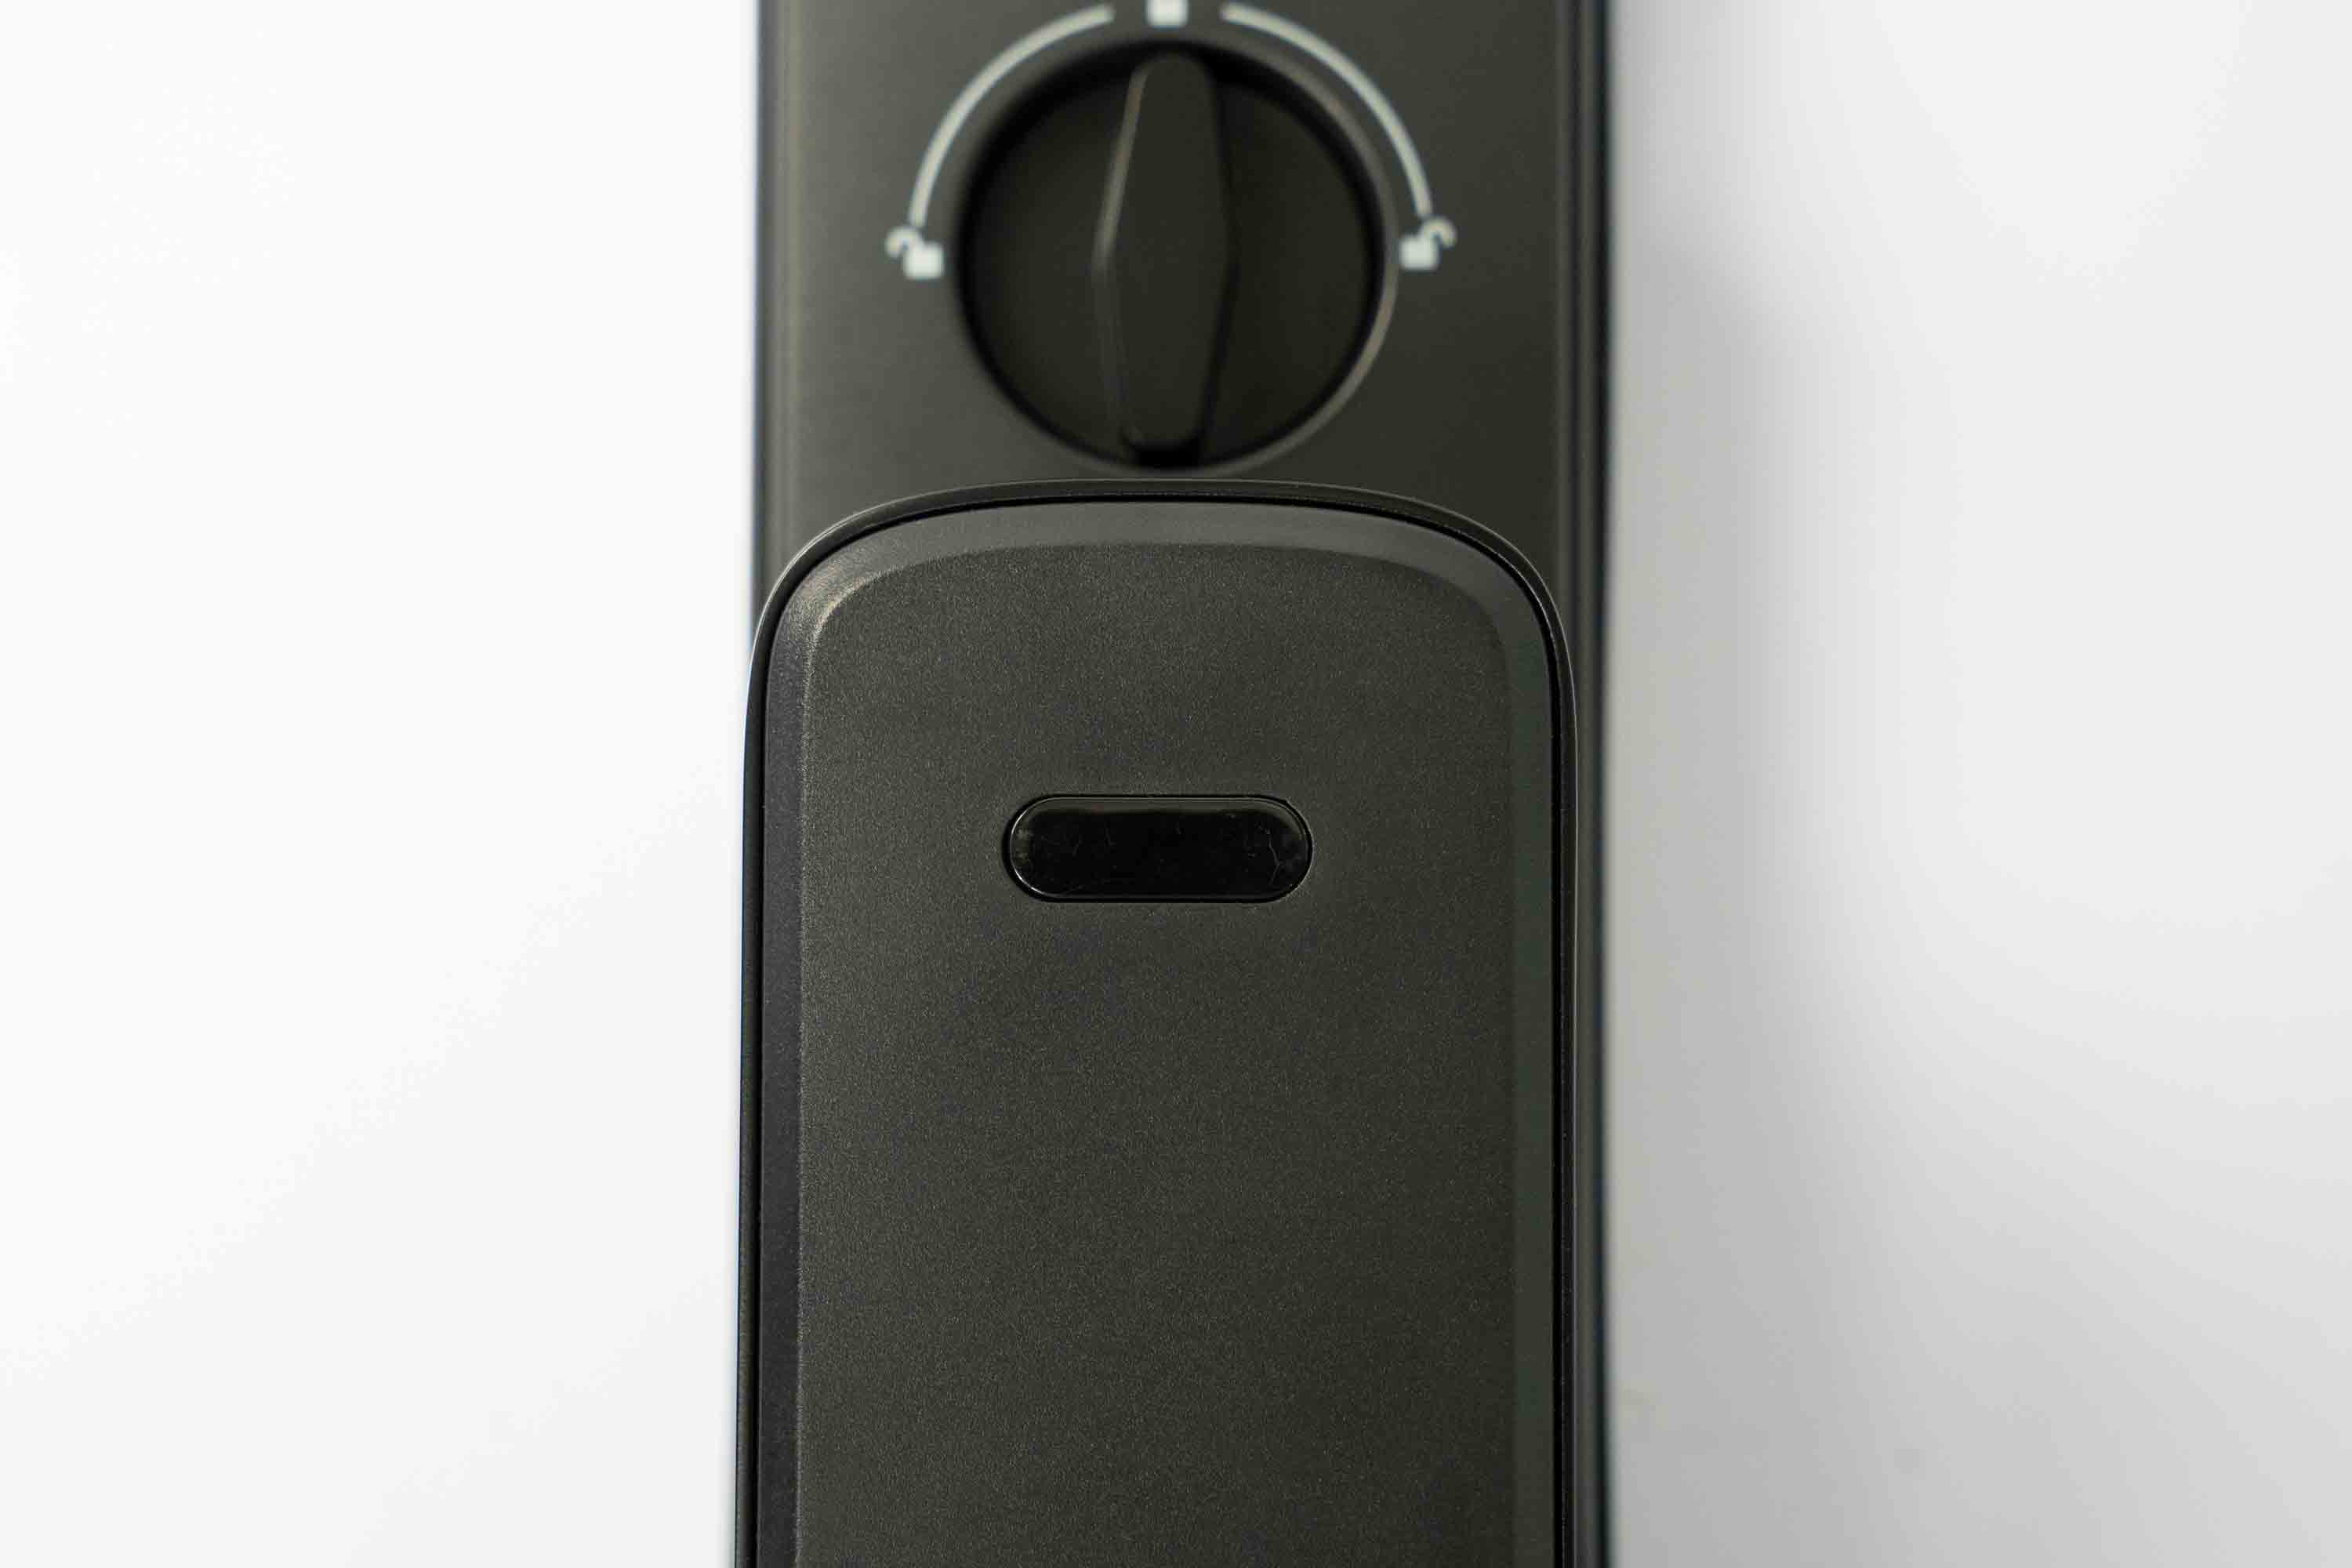 New versions of α hardcore upgrade! Philips Alpha-VP visual smart lock debuts with screen, start your new experience with visual smart lock!